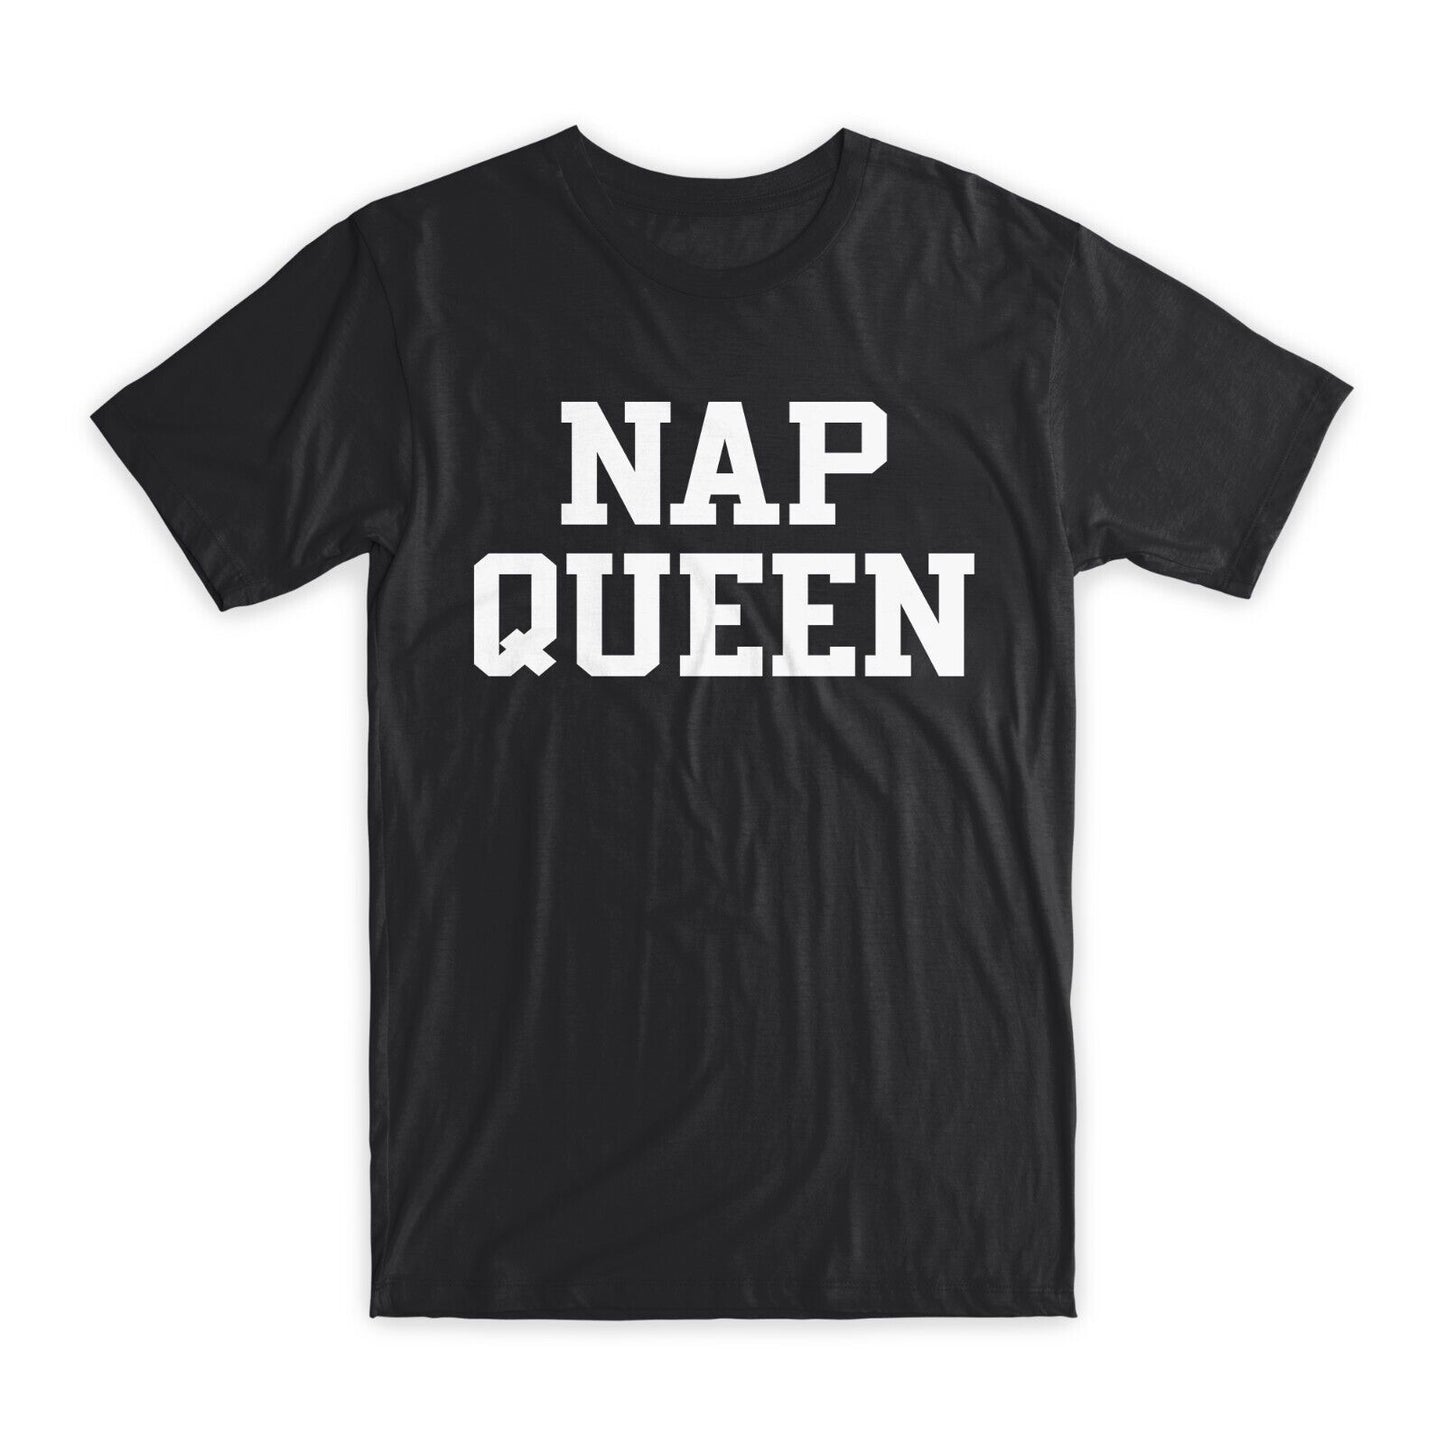 Nap Queen Print T-Shirt Premium Soft Cotton Crew Neck Funny Tee Novelty Gift NEW